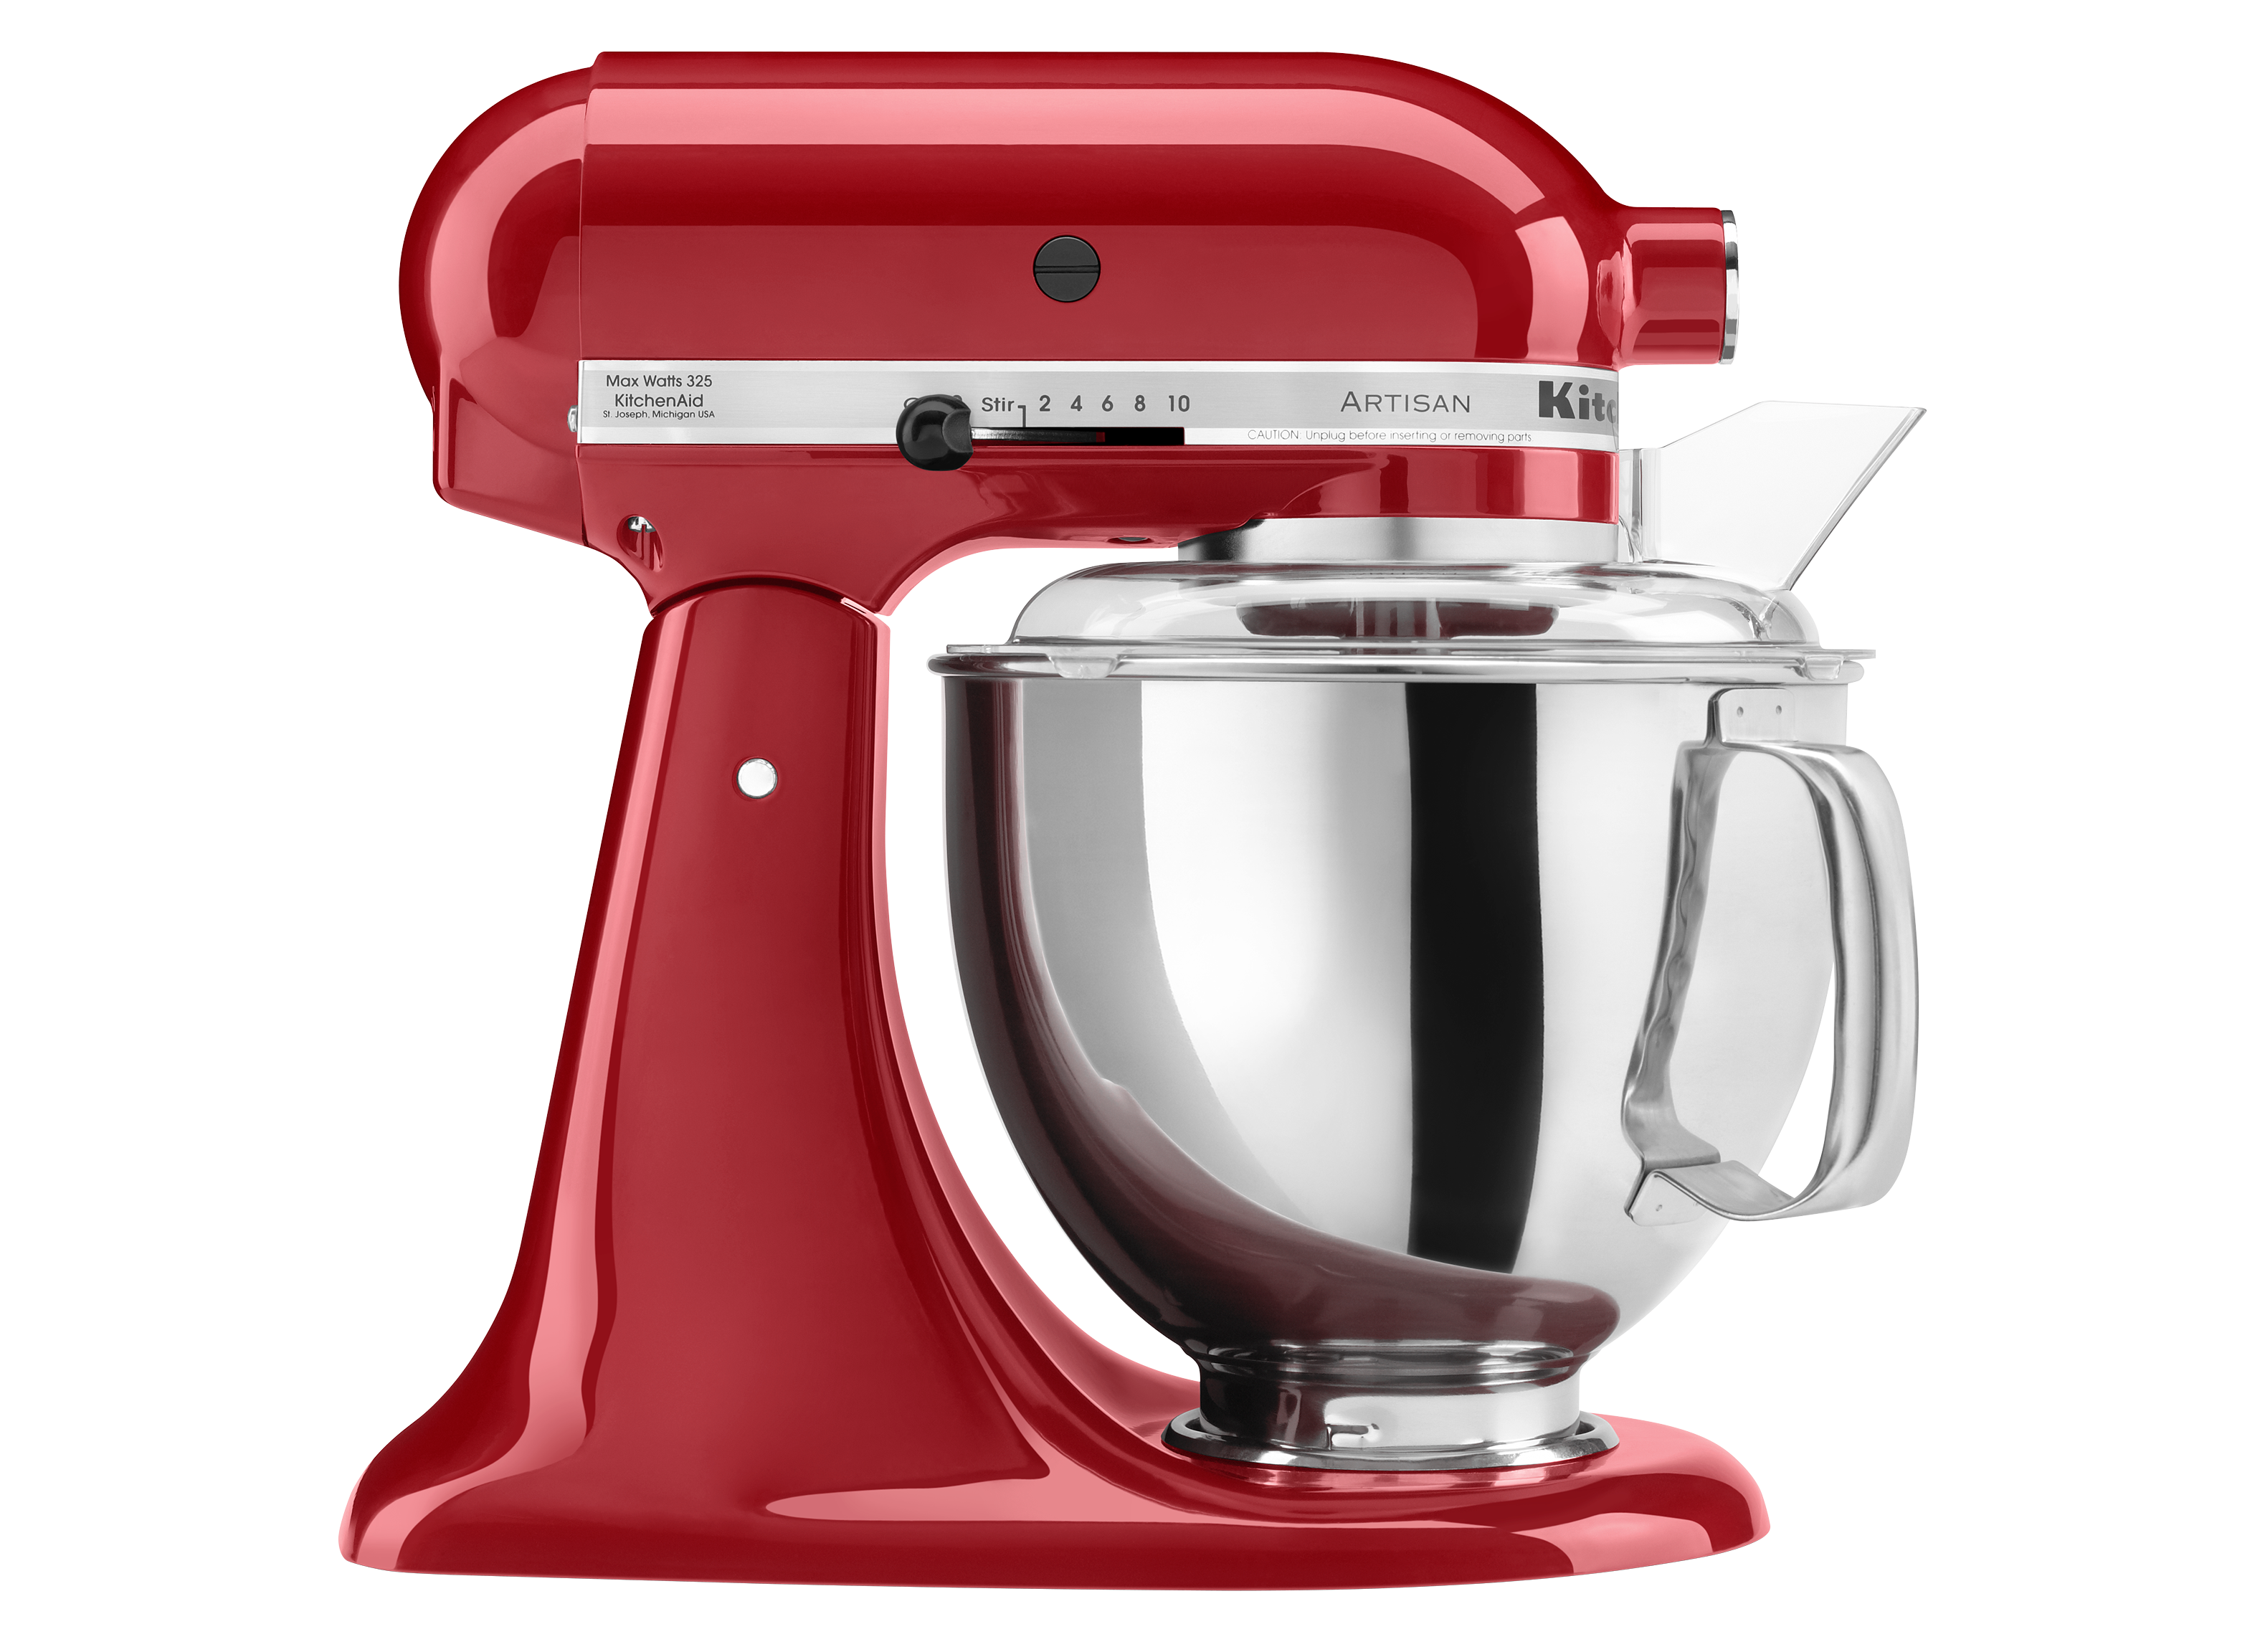 Best Buy: KSM1JA Juicer and Sauce Attachment for KitchenAid Stand